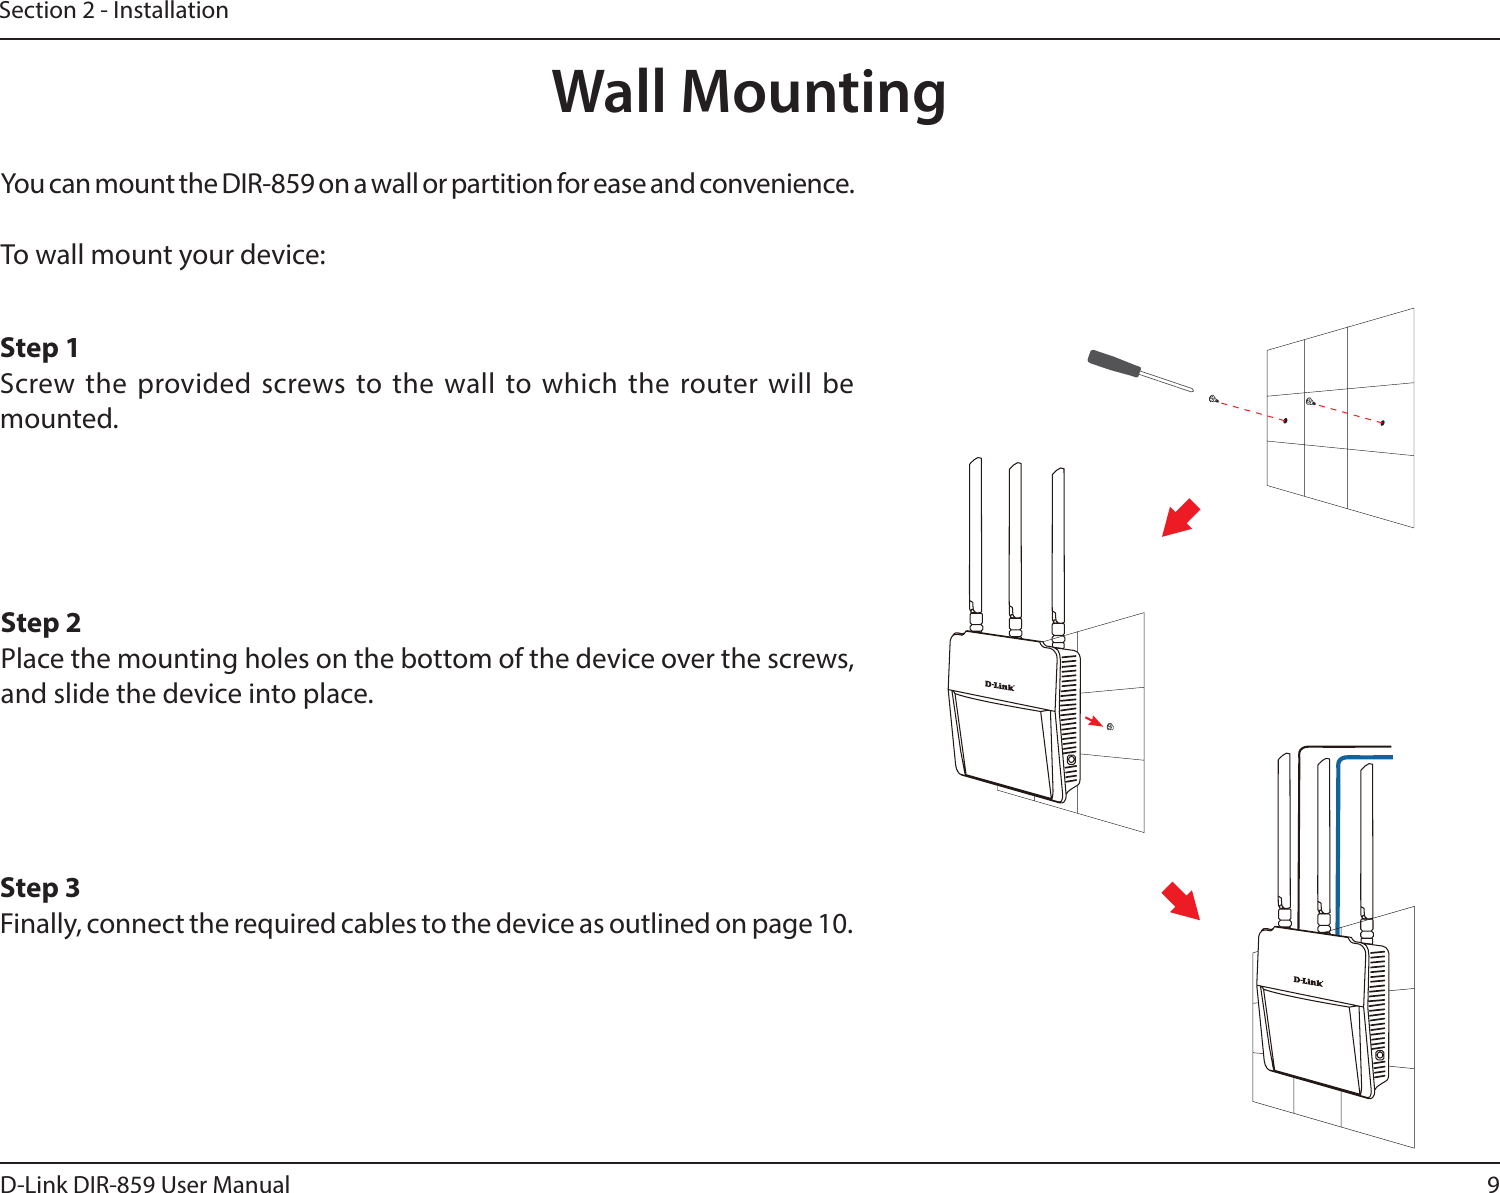 9D-Link DIR-859 User ManualSection 2 - InstallationWall MountingYou can mount the DIR-859 on a wall or partition for ease and convenience.To wall mount your device:Step 1Screw the provided screws to the wall to which the router will be mounted.Step 2Place the mounting holes on the bottom of the device over the screws, and slide the device into place.Step 3Finally, connect the required cables to the device as outlined on page 10.